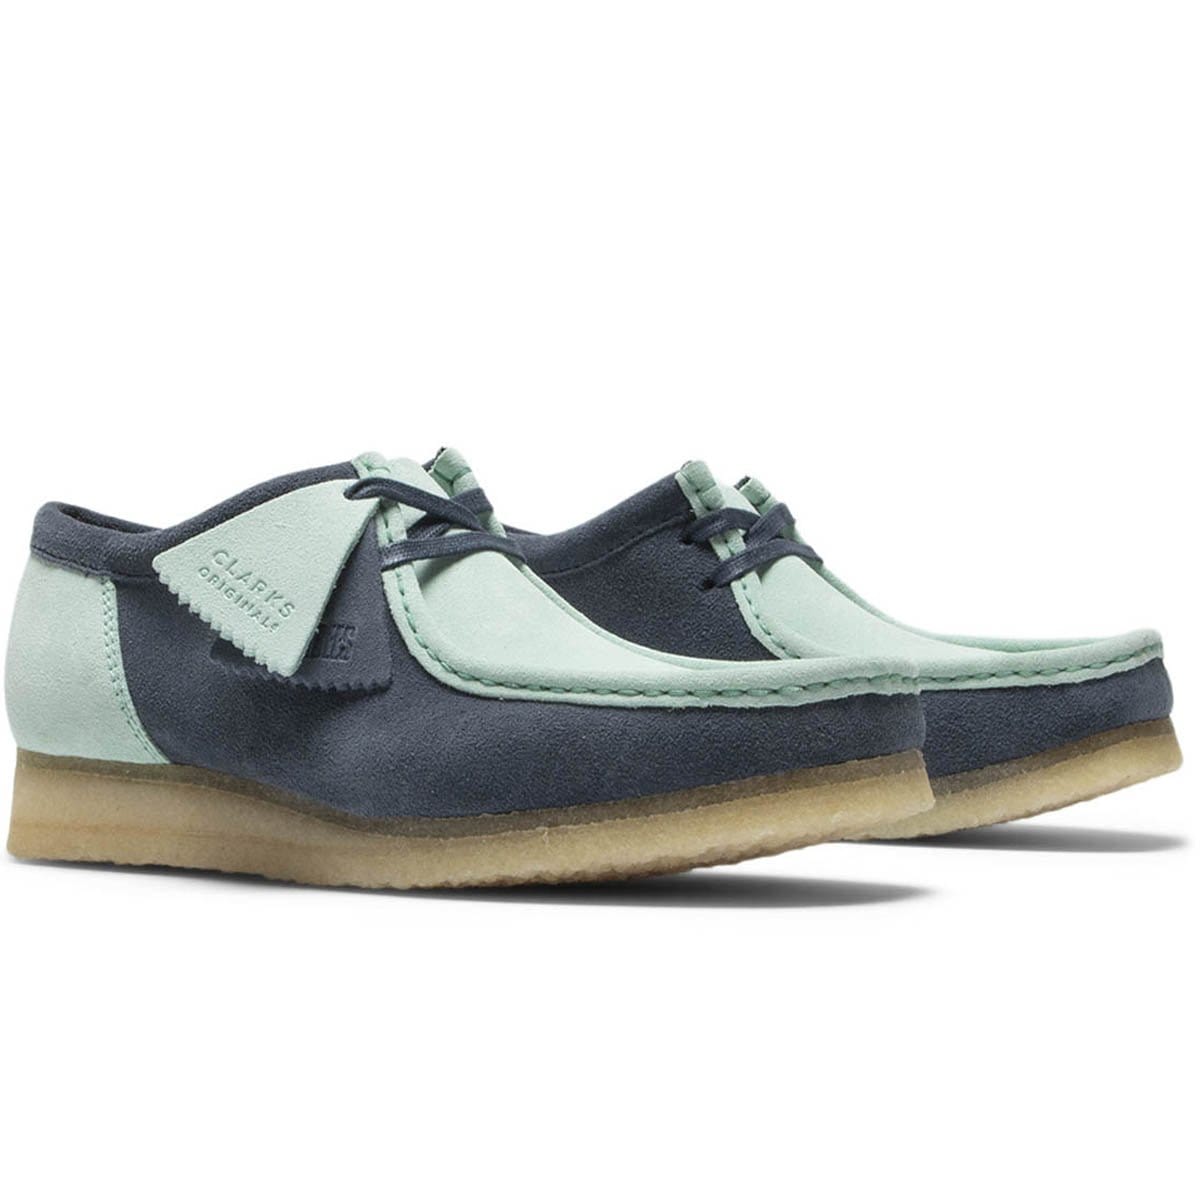 Clarks Shoes WALLABEE